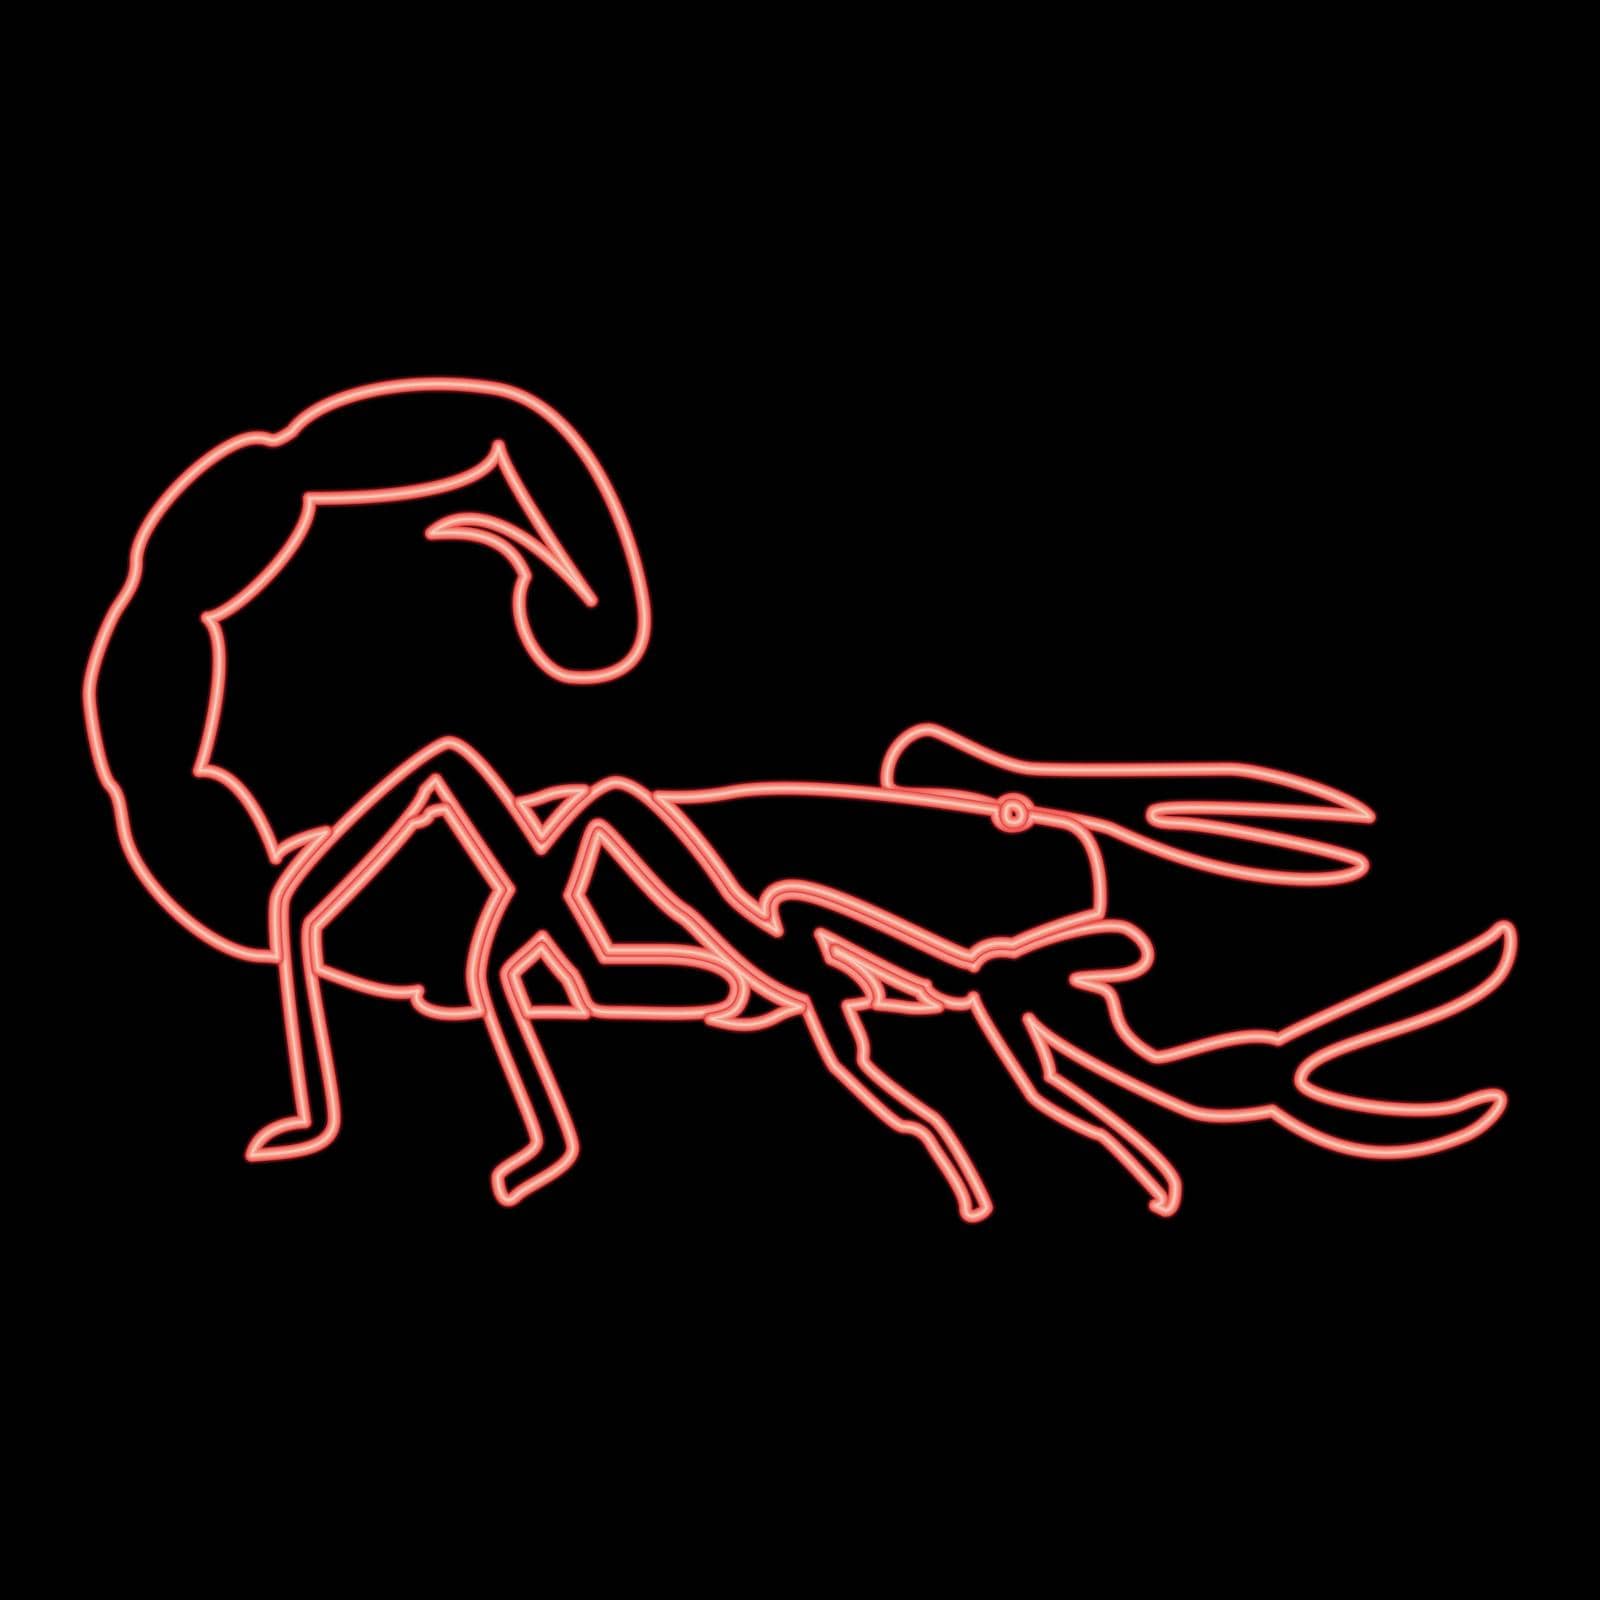 Neon scorpion red color vector illustration flat style light image